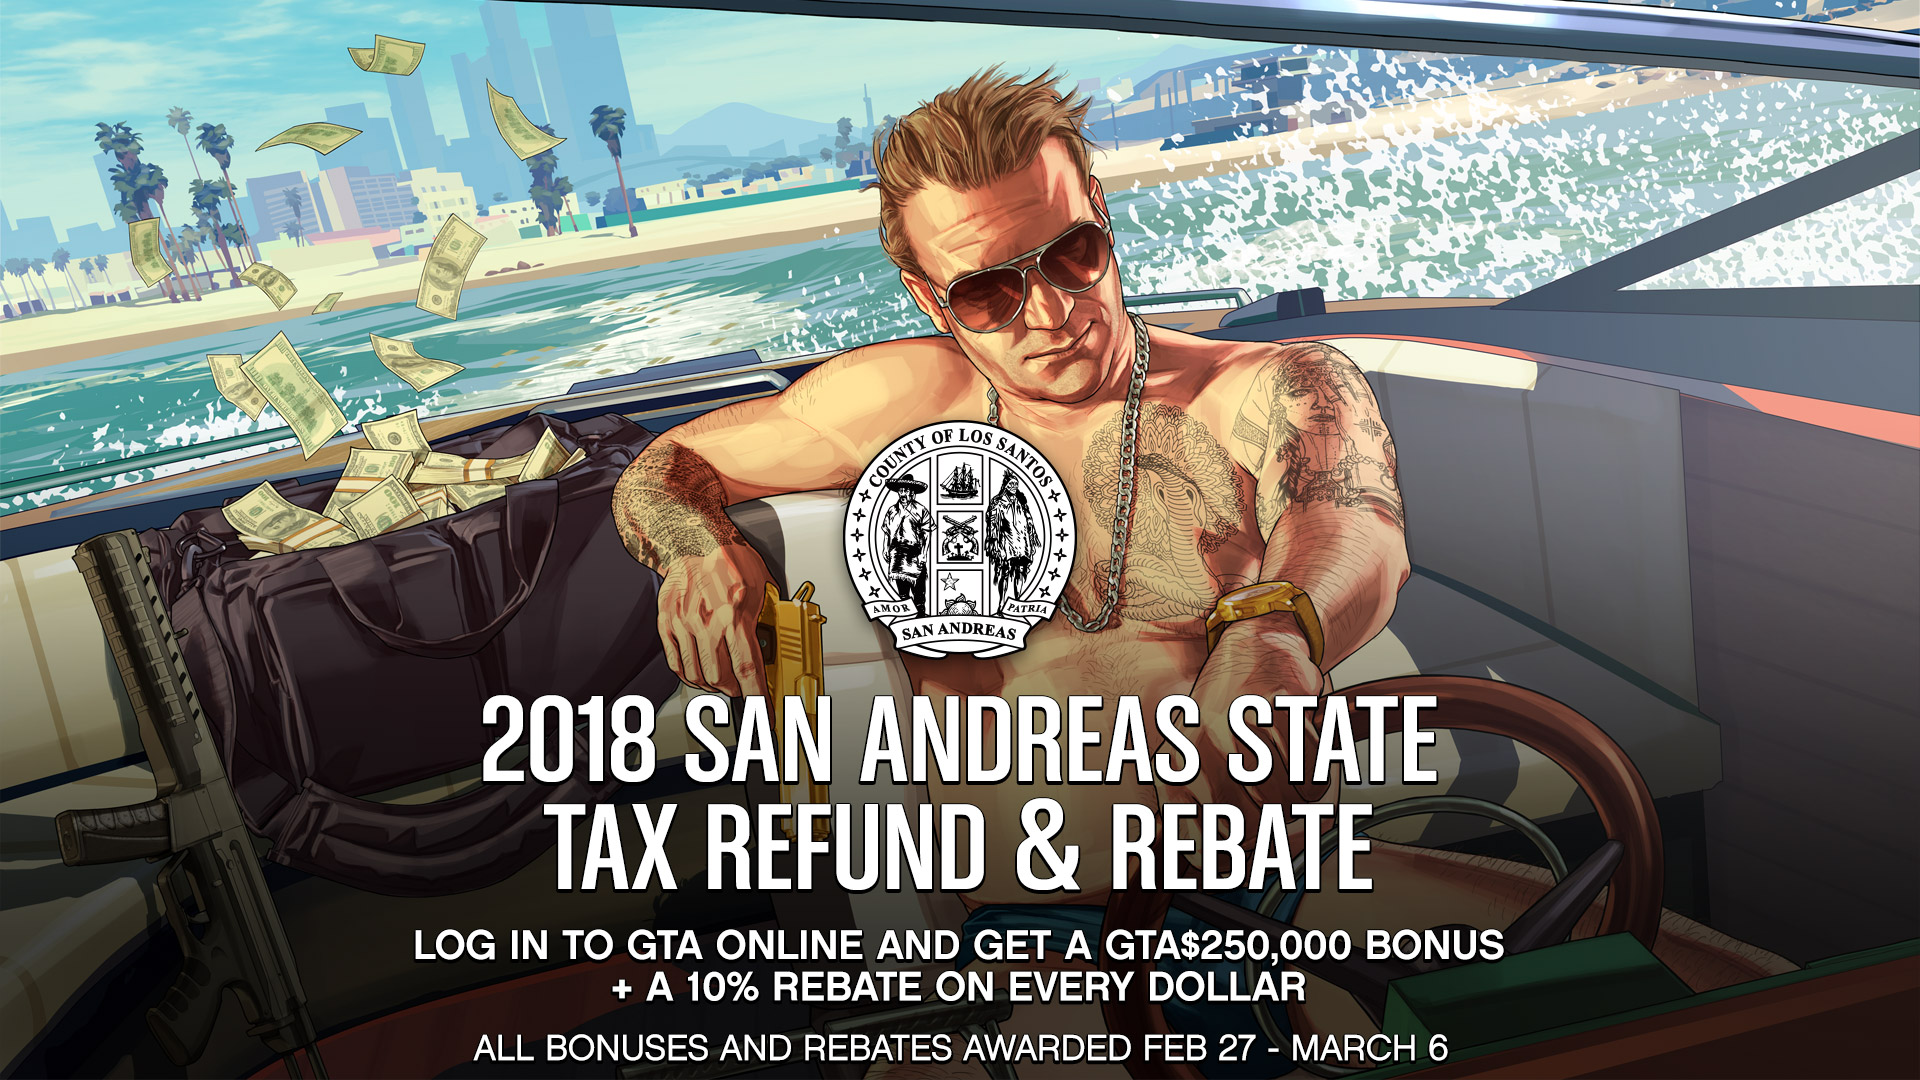 Official GTA Online tax refund and rebate promotional image. It reads: "2018 San Andreas State Tax Refund & Rebate. Log in to GTA Online and get a GTA$250,000 bonus + a 10% rebate on every dollar. All bonuses and rebates awarded Feb 27-March 6